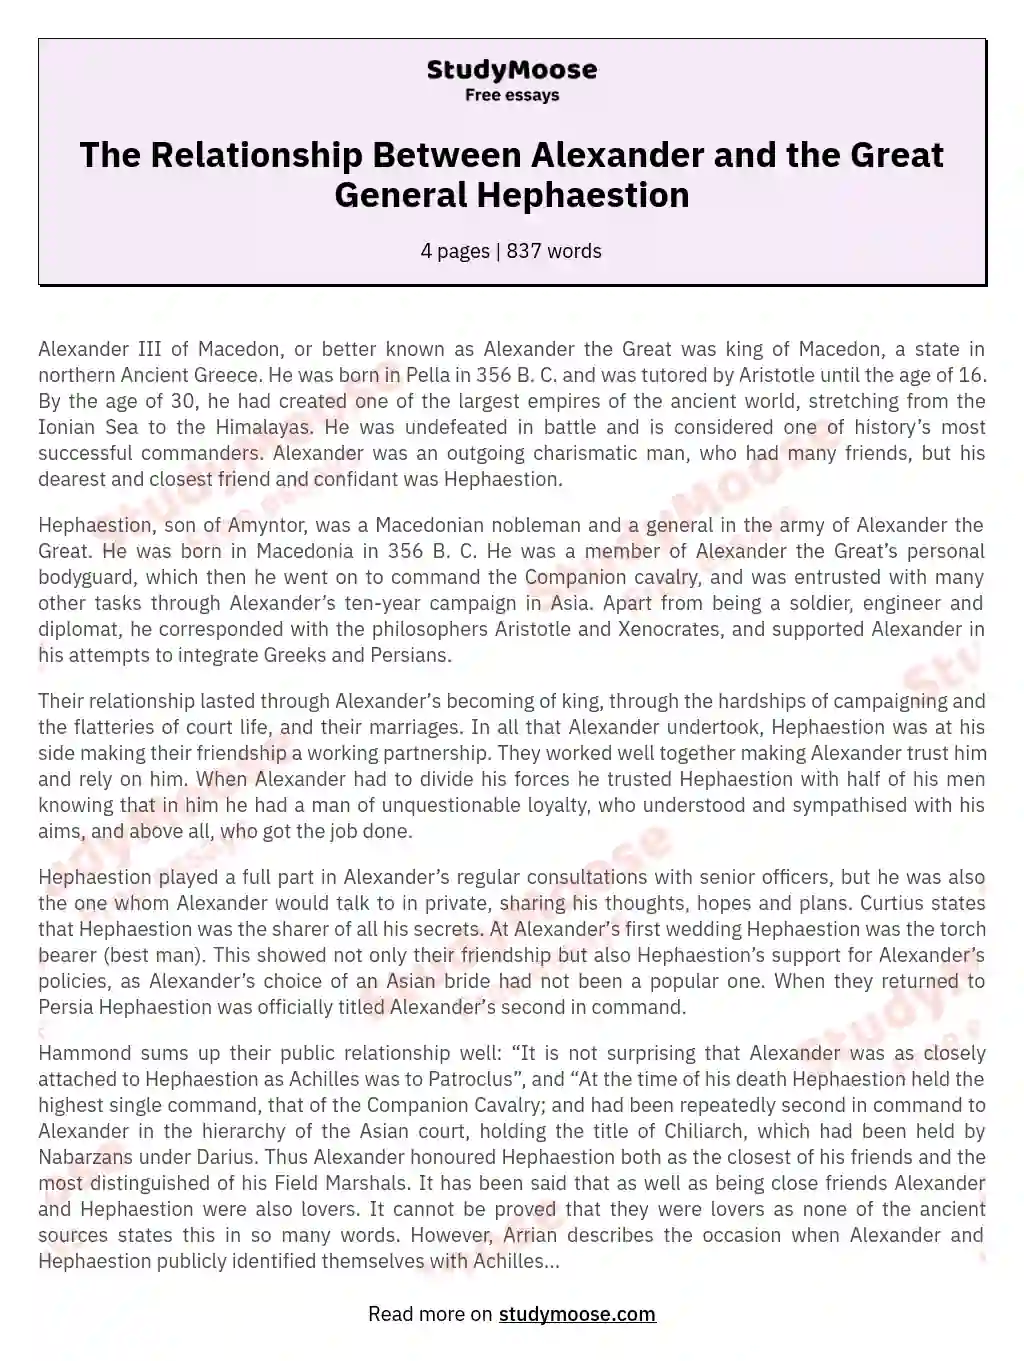 The Relationship Between Alexander and the Great General Hephaestion